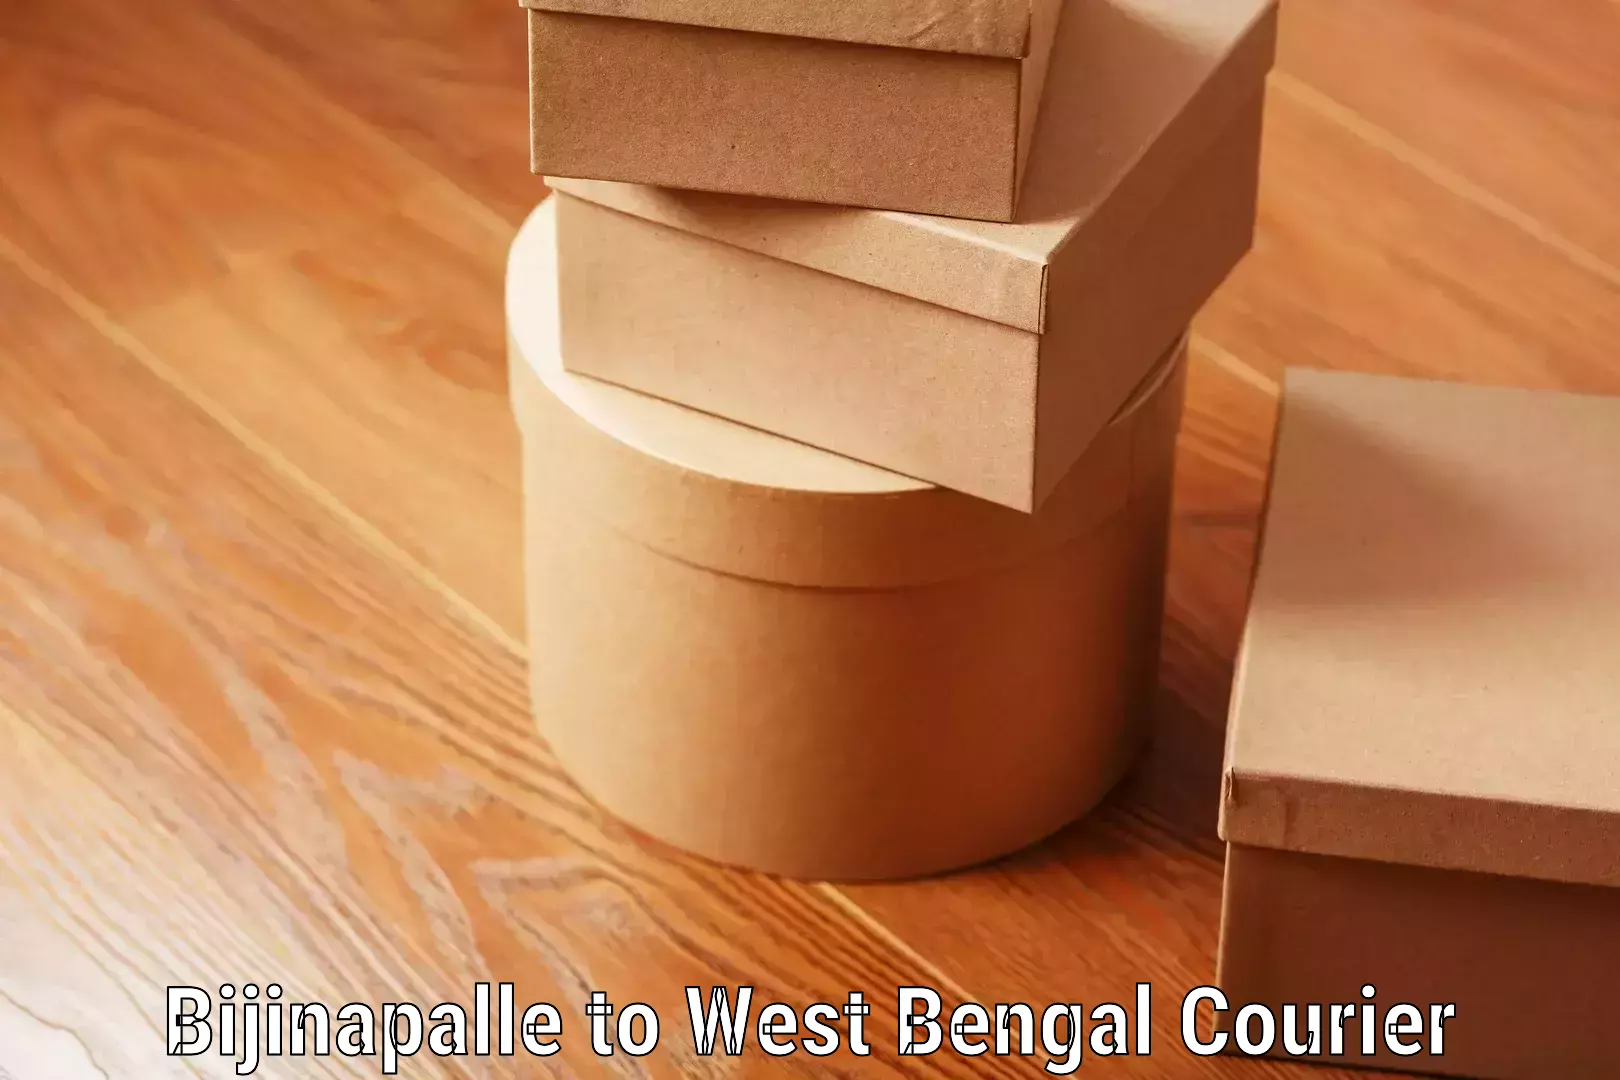 Luggage transfer service Bijinapalle to West Bengal